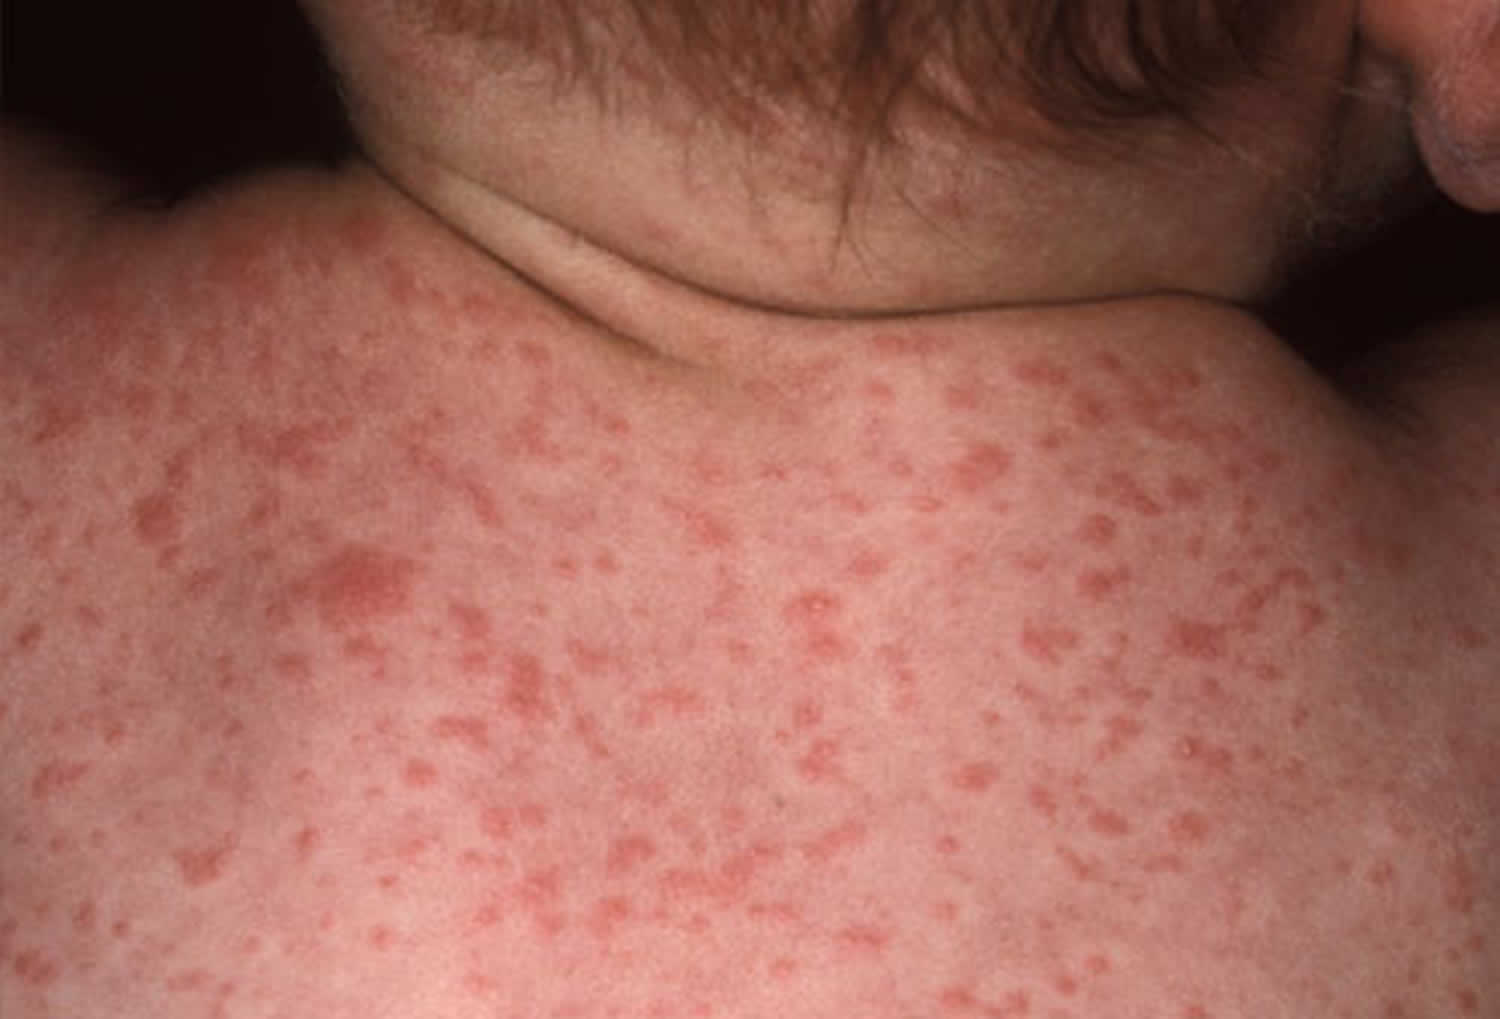 Typhoid fever rose spots, causes, prevention & treatment